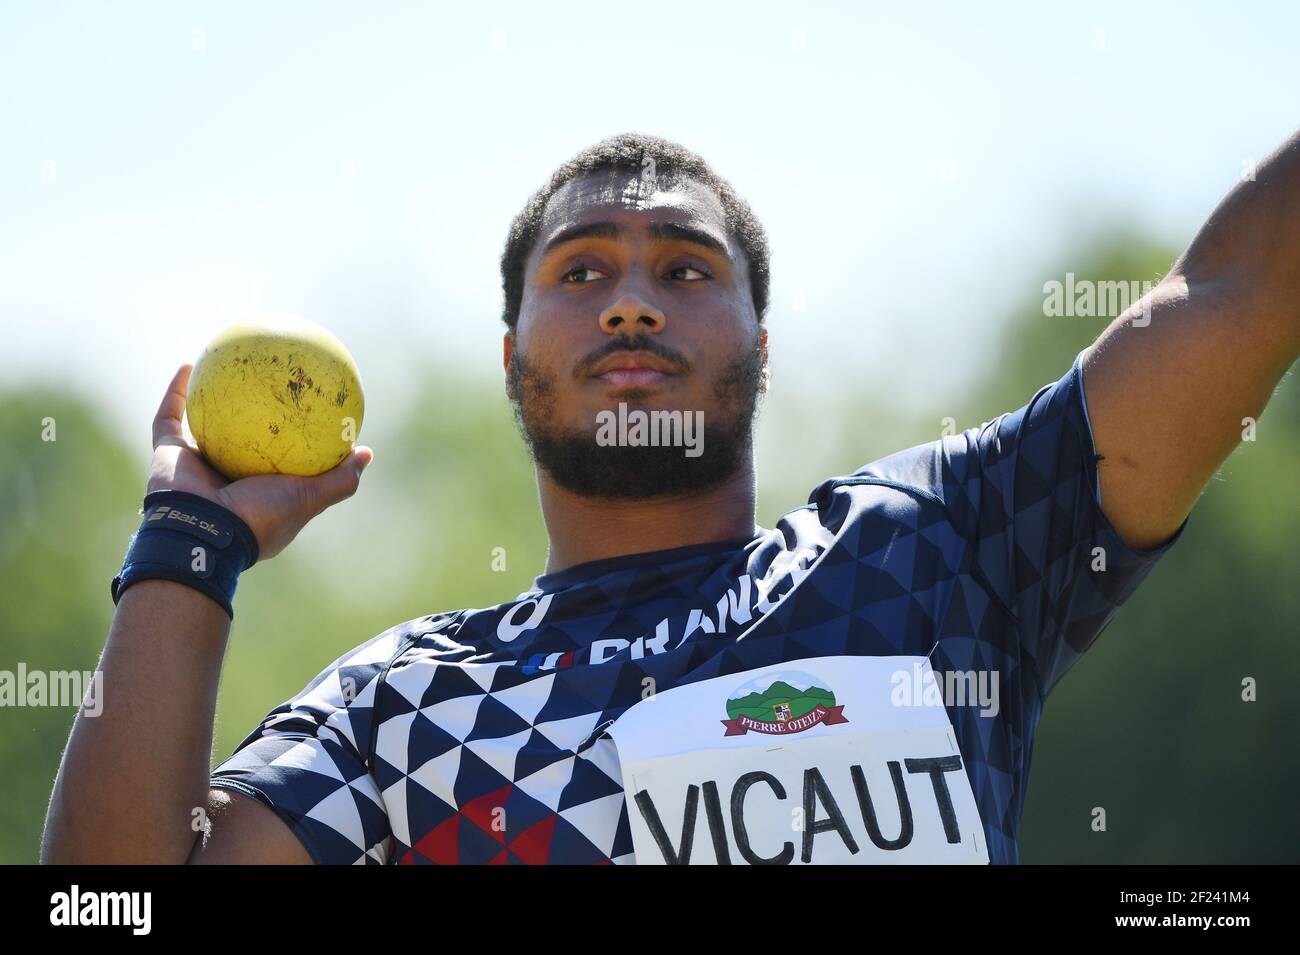 Willy Vicaut (FRA) competes on Men's Shot put on Decathlon during the  IAAF's Decastar World Combined